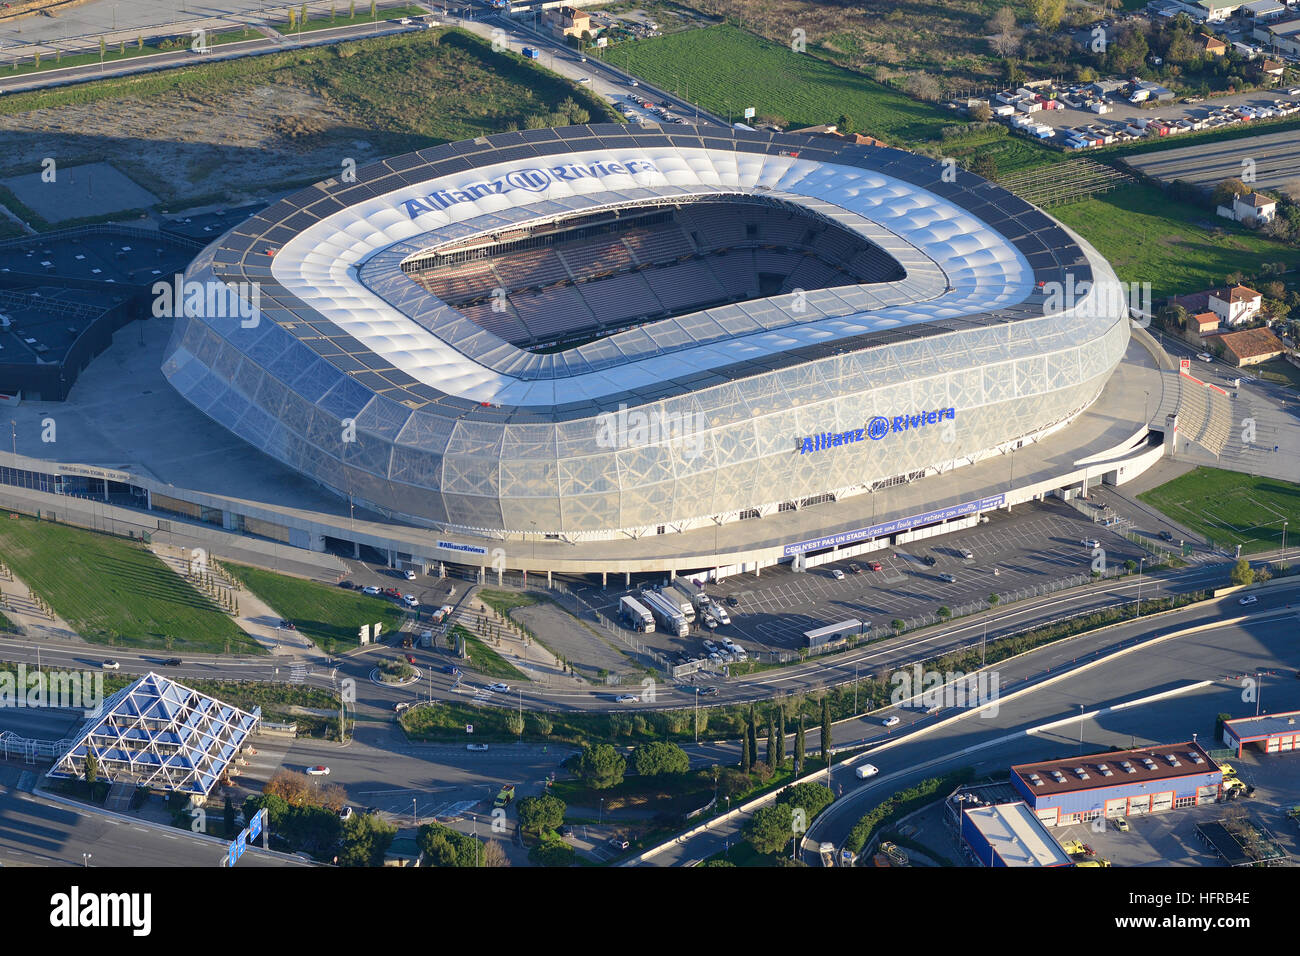 Allianz Riviera Stadium Aerial View Large Multi Use Arena Built In 13 Near The Nice Cote D Azur Airport France Stock Photo Alamy